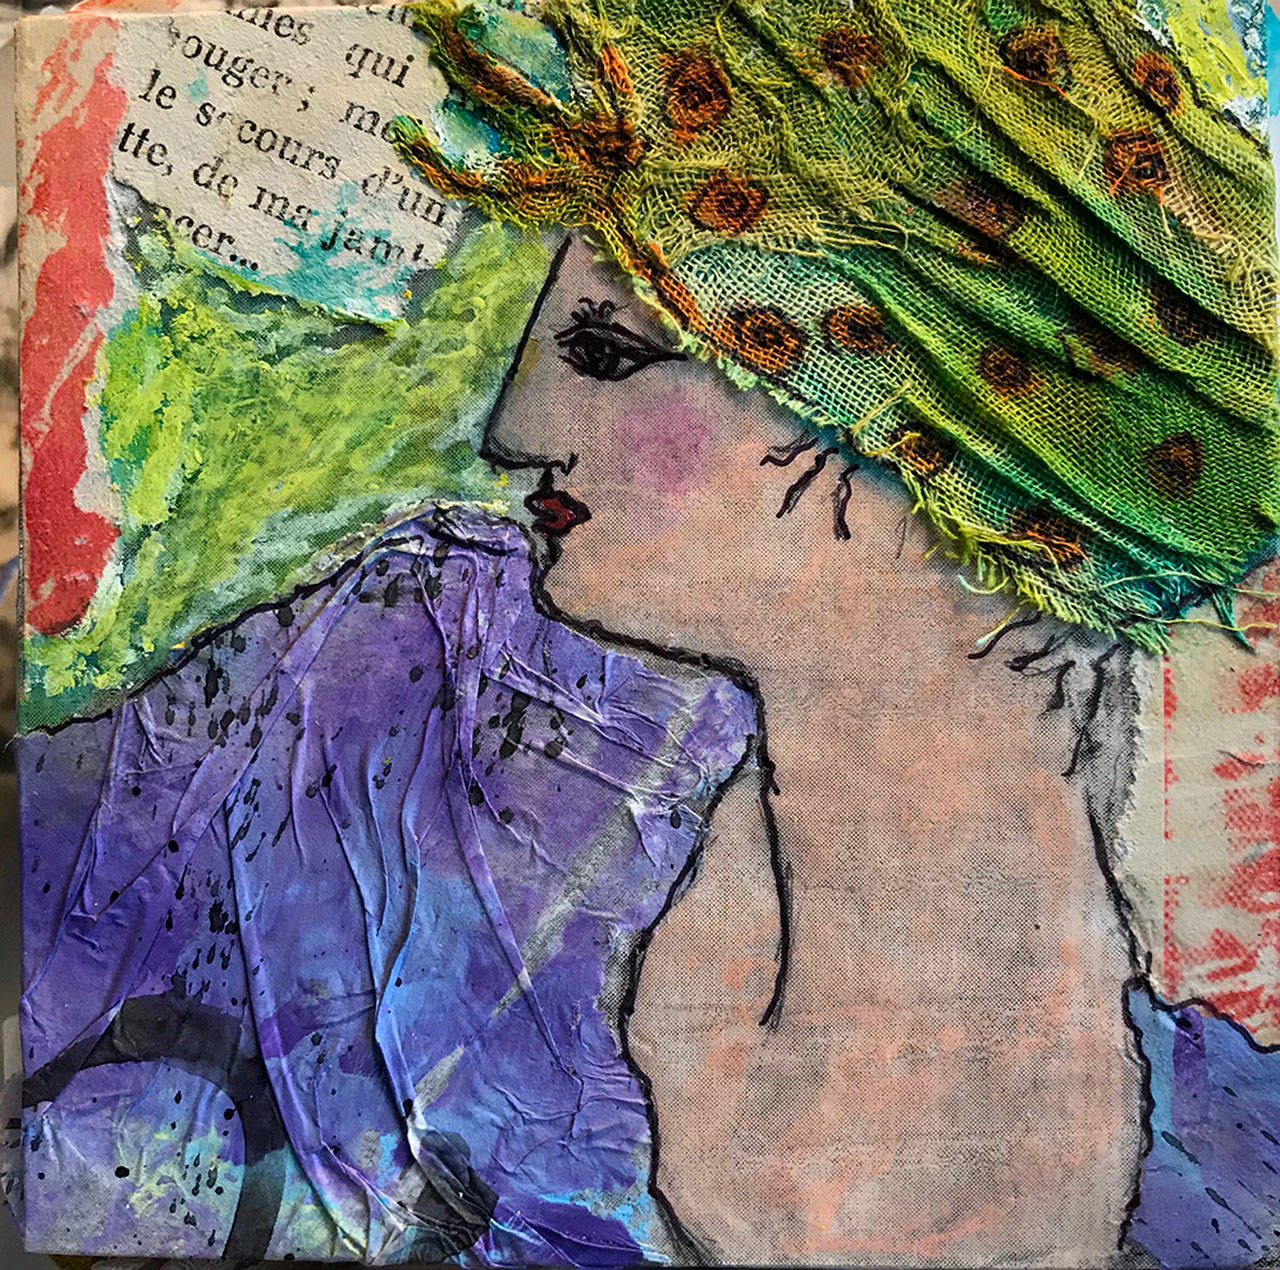 “Woman in Band” by Sydnee Elliot, an artist who weaves together bits and pieces of history and the emotional scraps of memories to create collages and mixed media. Her work will be featured during April at Raven Rocks Gallery at Greenbank Farm. Second Saturday reception is 2-5 p.m. on April 13.